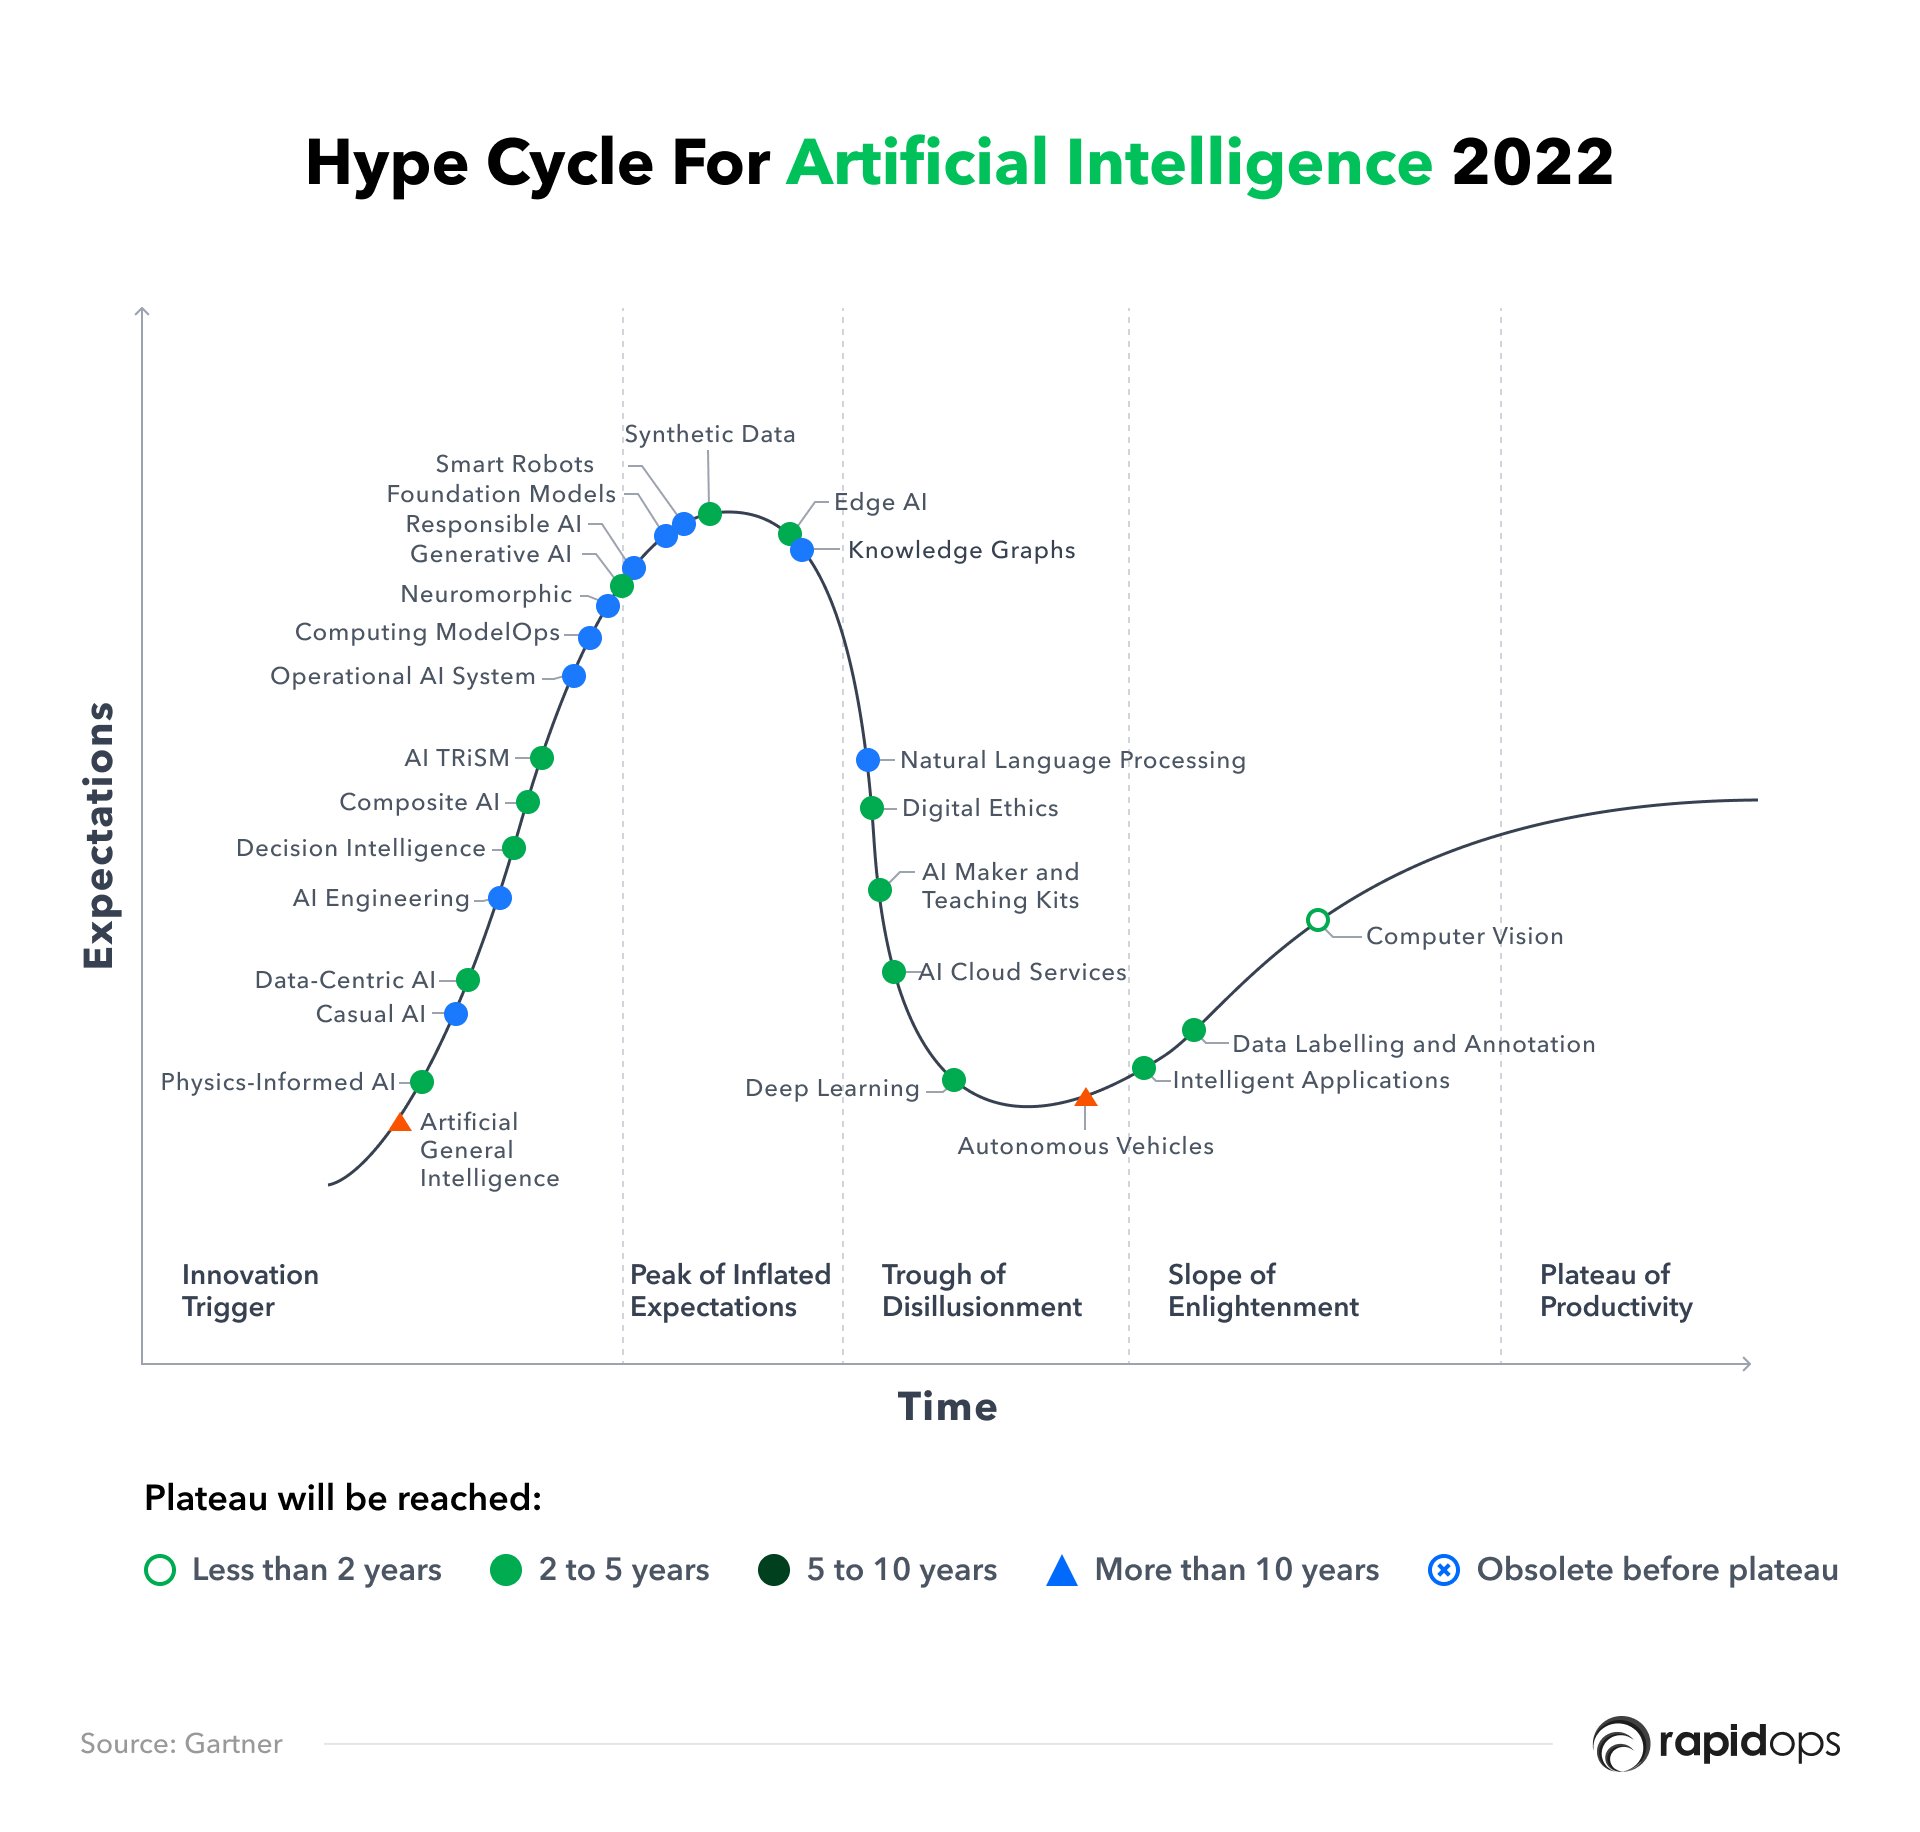 Hype cycle for artificial intelligence 2022